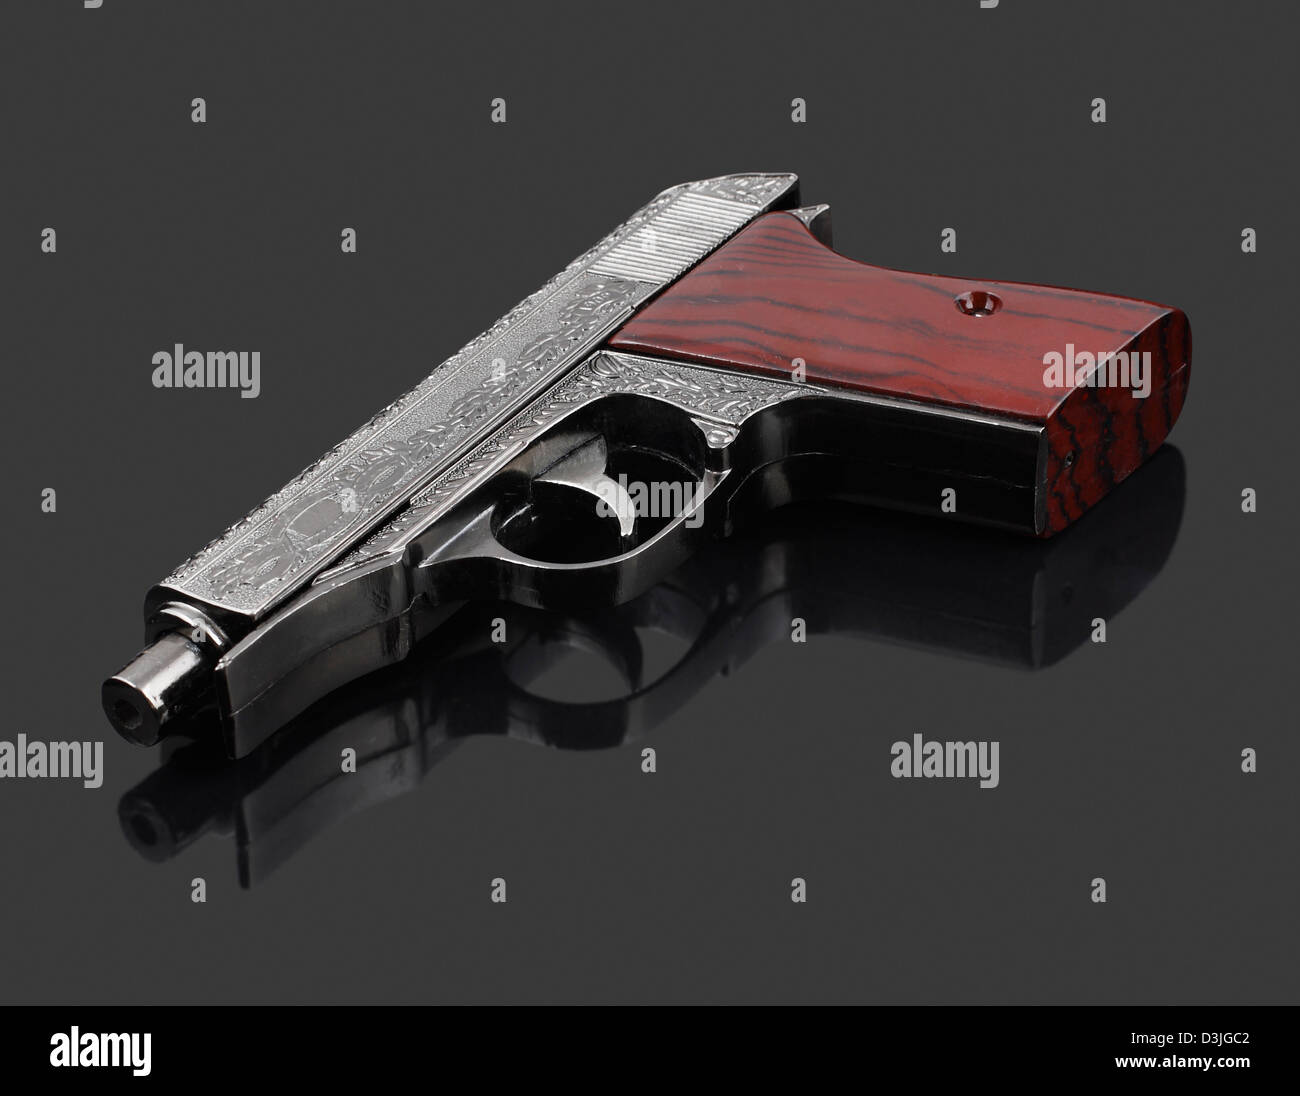 Handgun with pattern, isolated on grey background Stock Photo